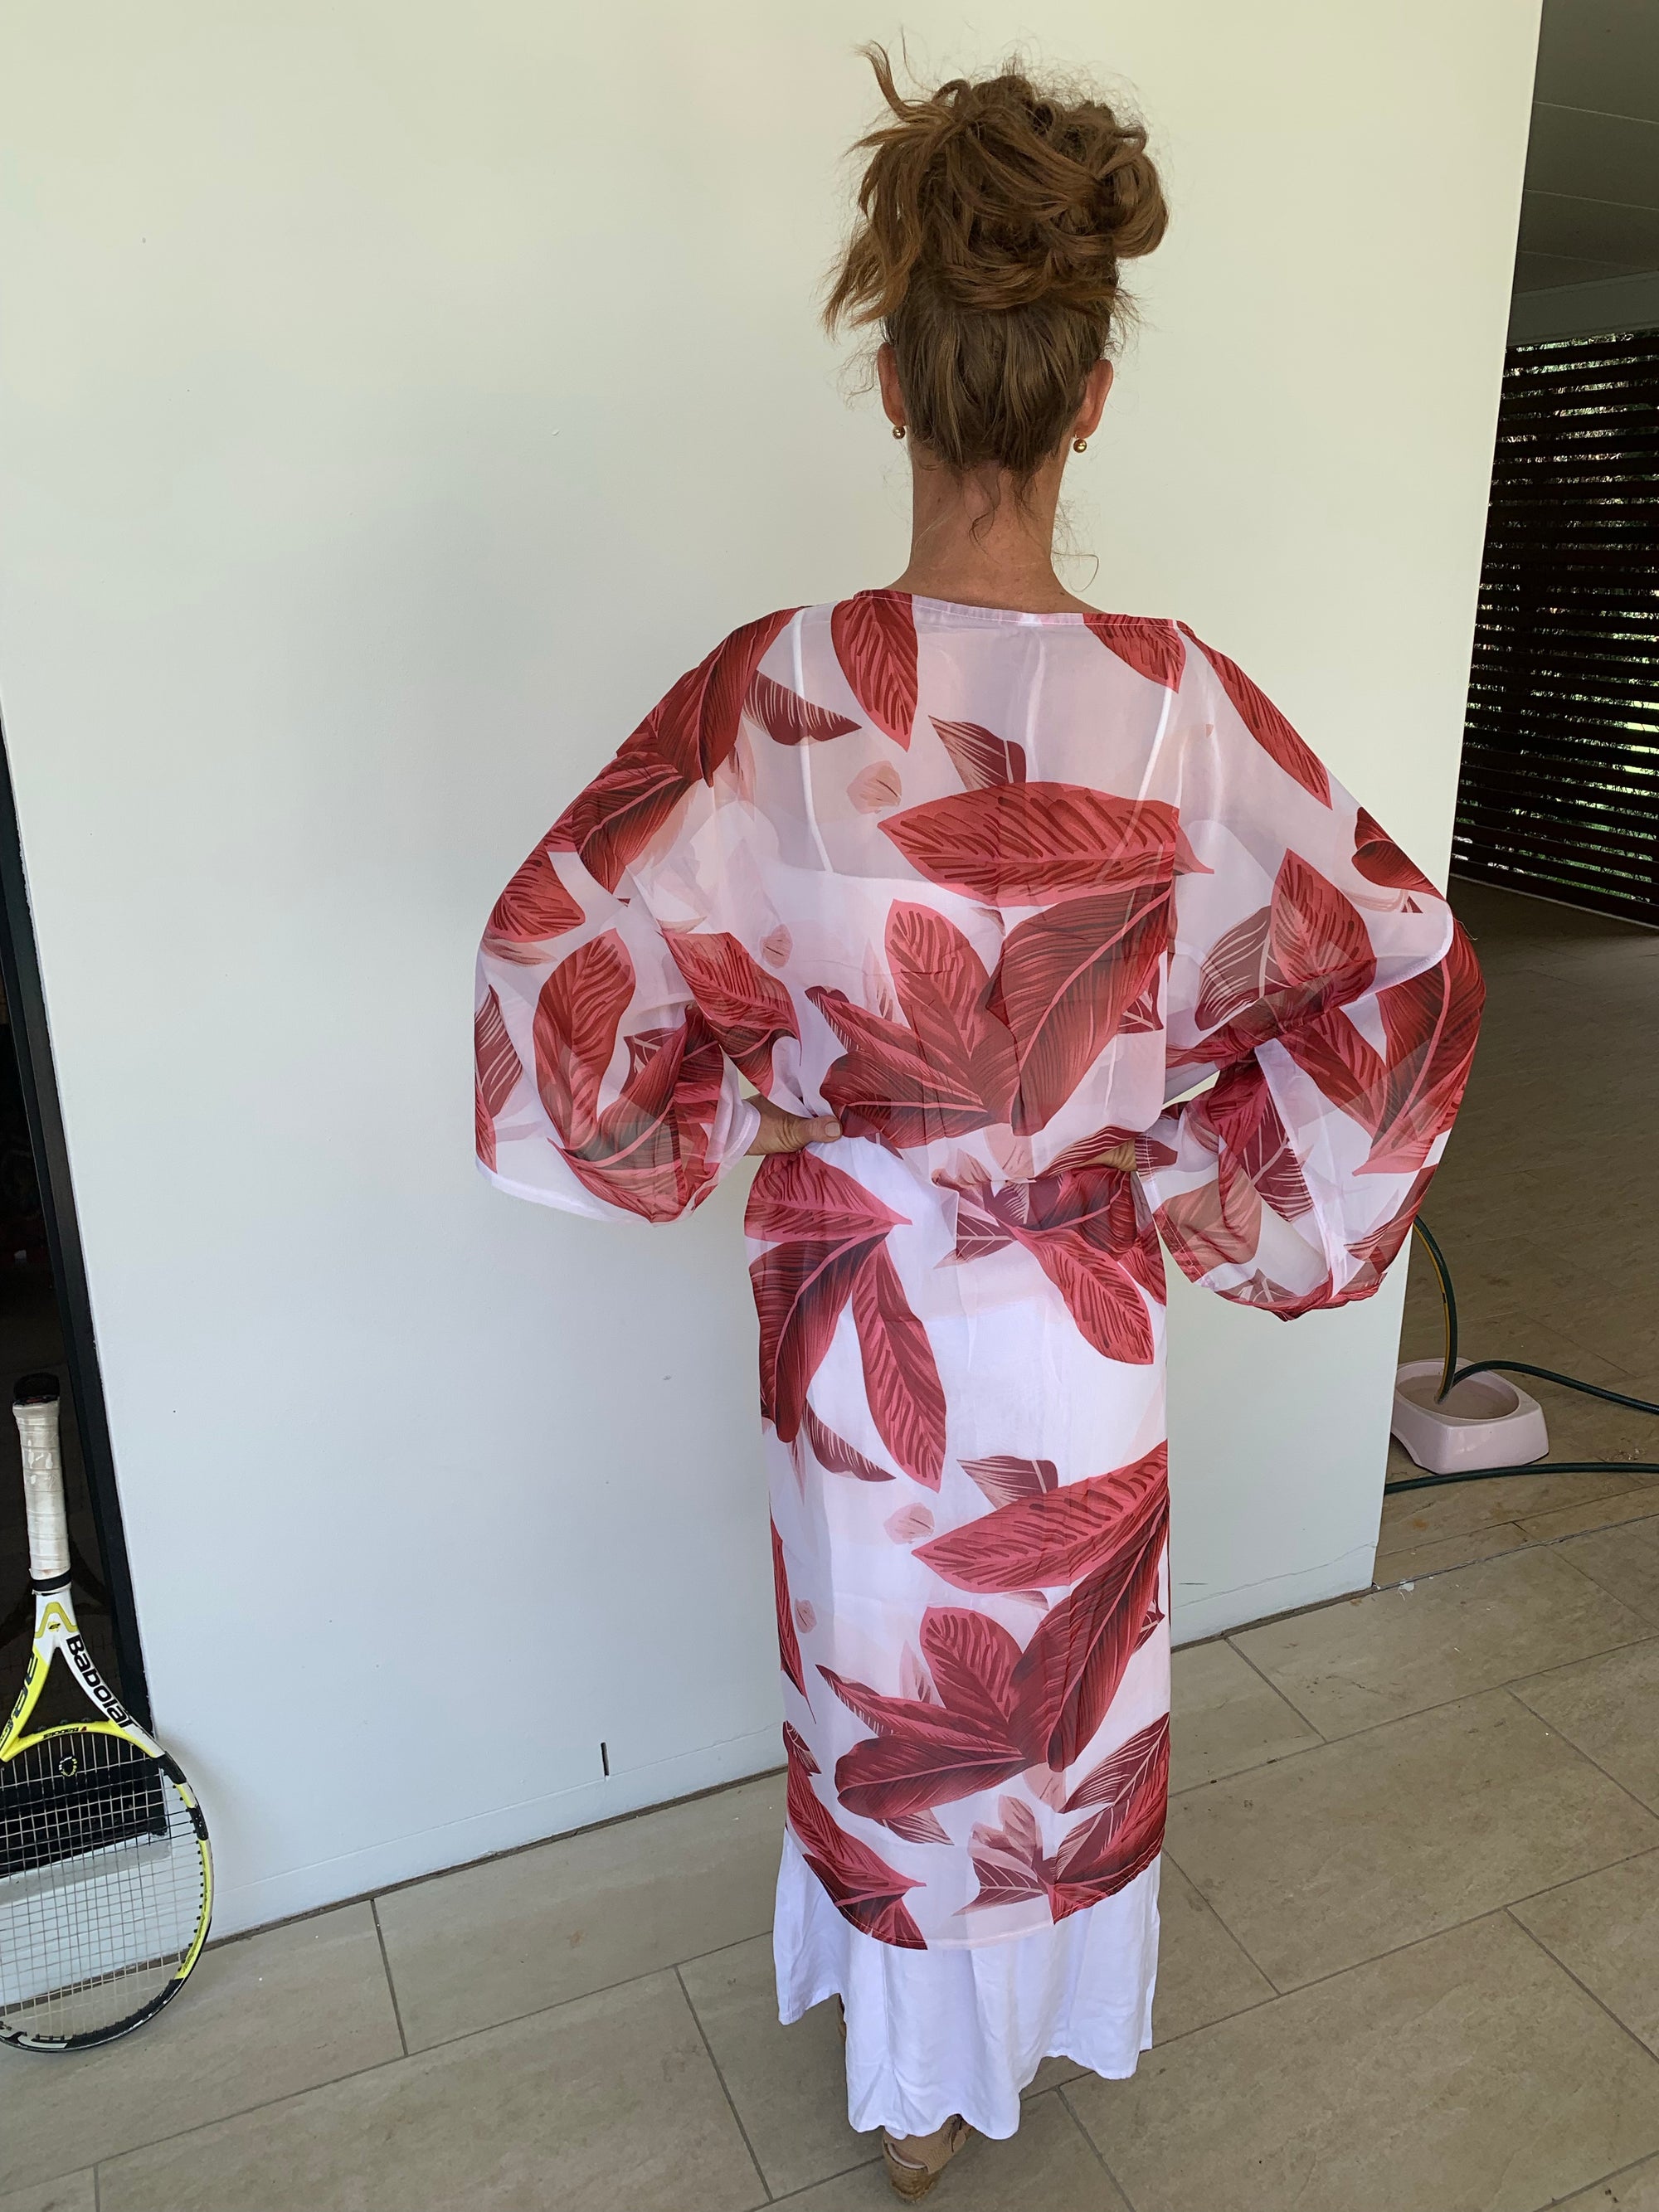 Long Sheer Kimono/CoverUp Jacket in White with Red Palm Leaves - Scandi & Me